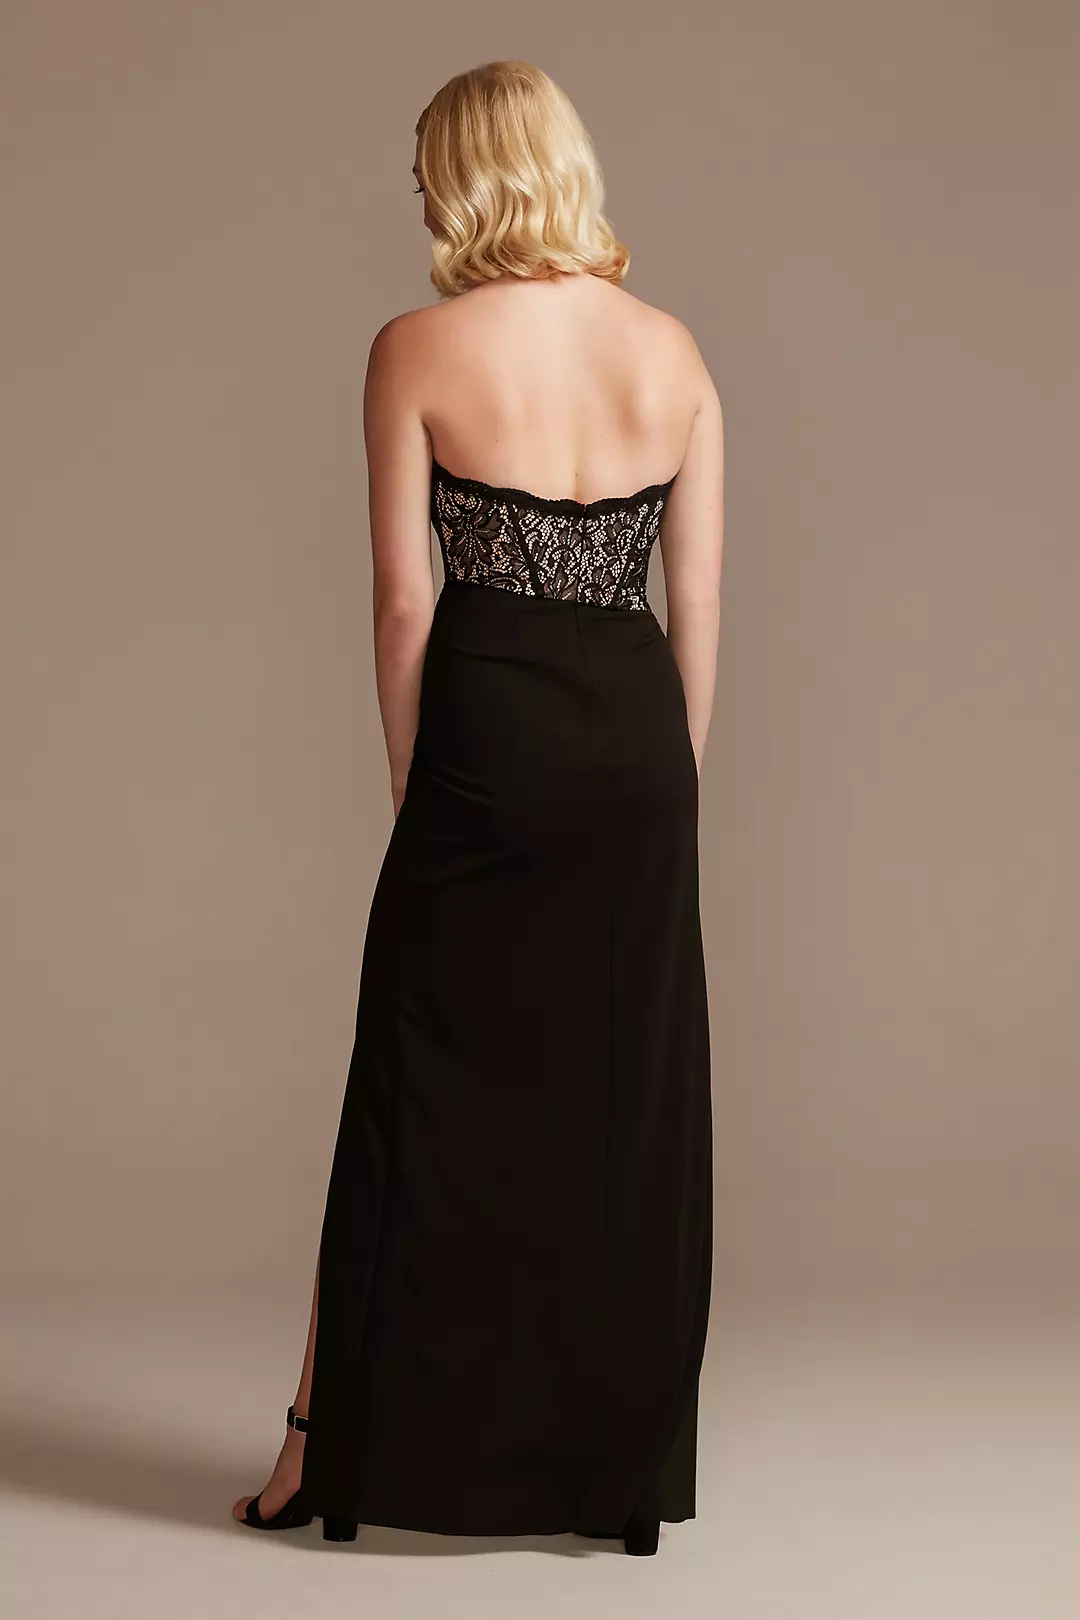 Lace Bodice Strapless Gown with Asymmetrical Waist Image 2